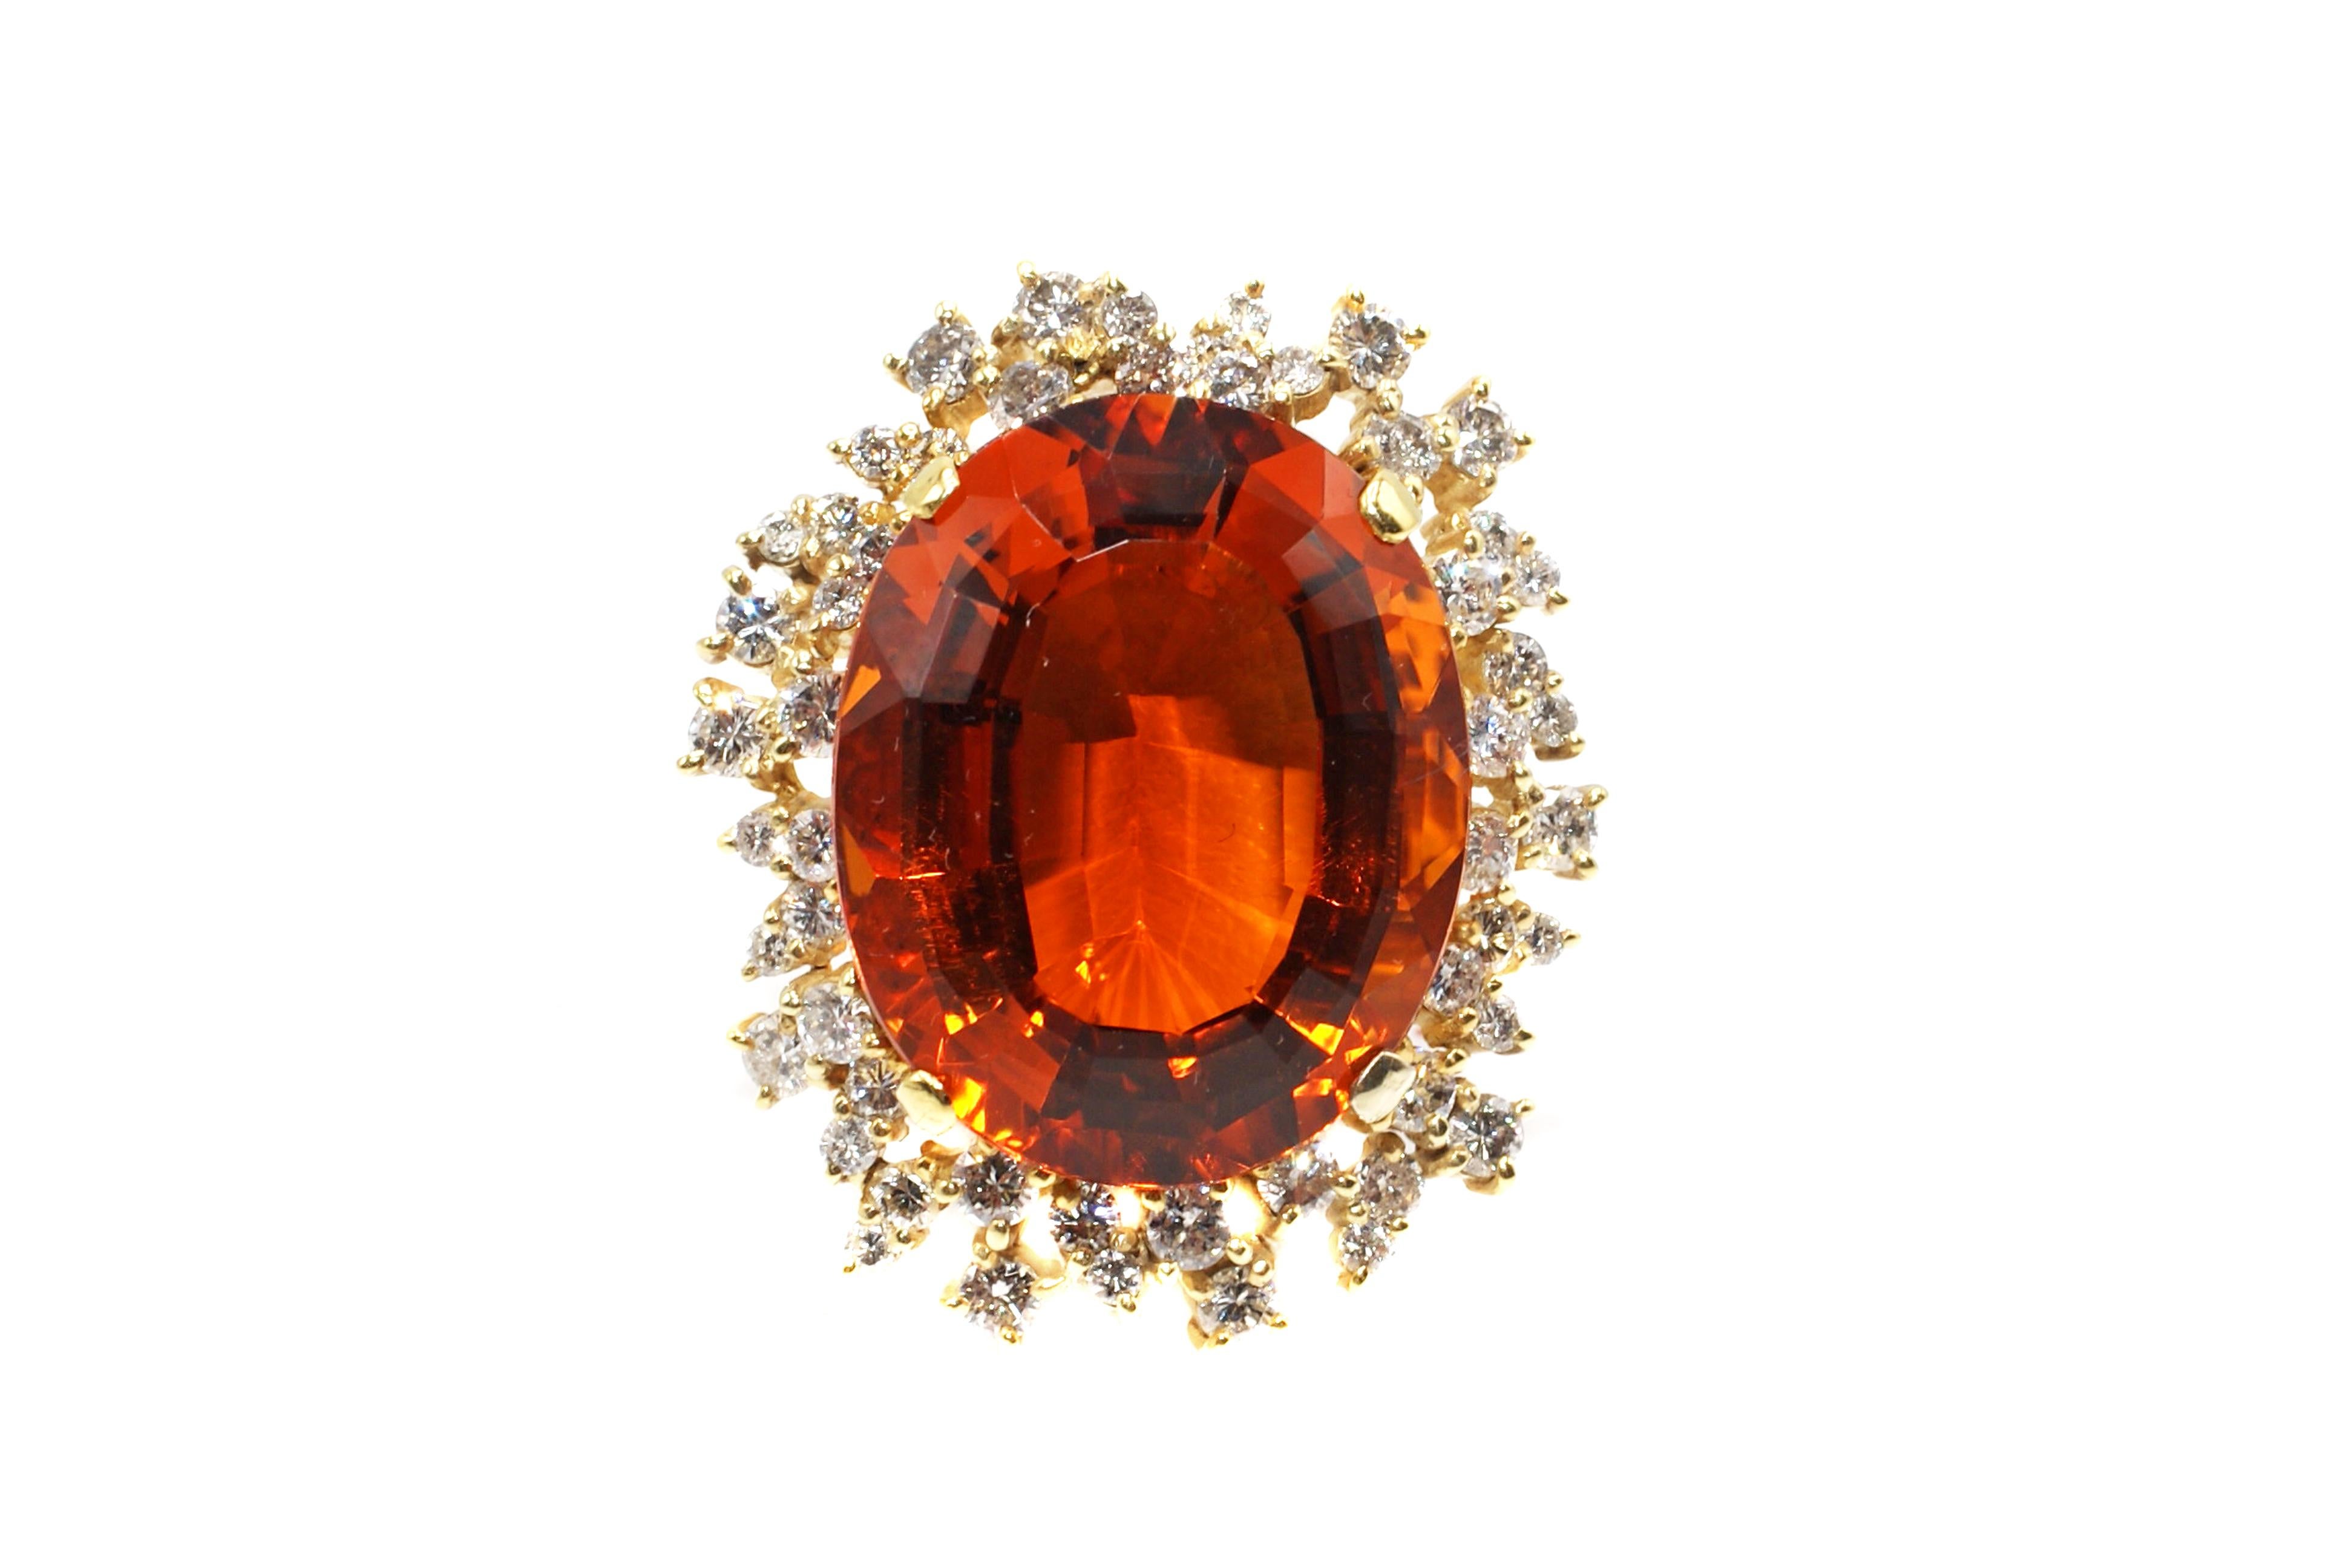 This unique and abstract handcrafted ring features a stunning oval faceted Palmeria Citrine measured to weigh over 50 carats. This amazingly well cut gemstone exhibits a wonderful orange color with fantastic life and brilliance. Surrounding the